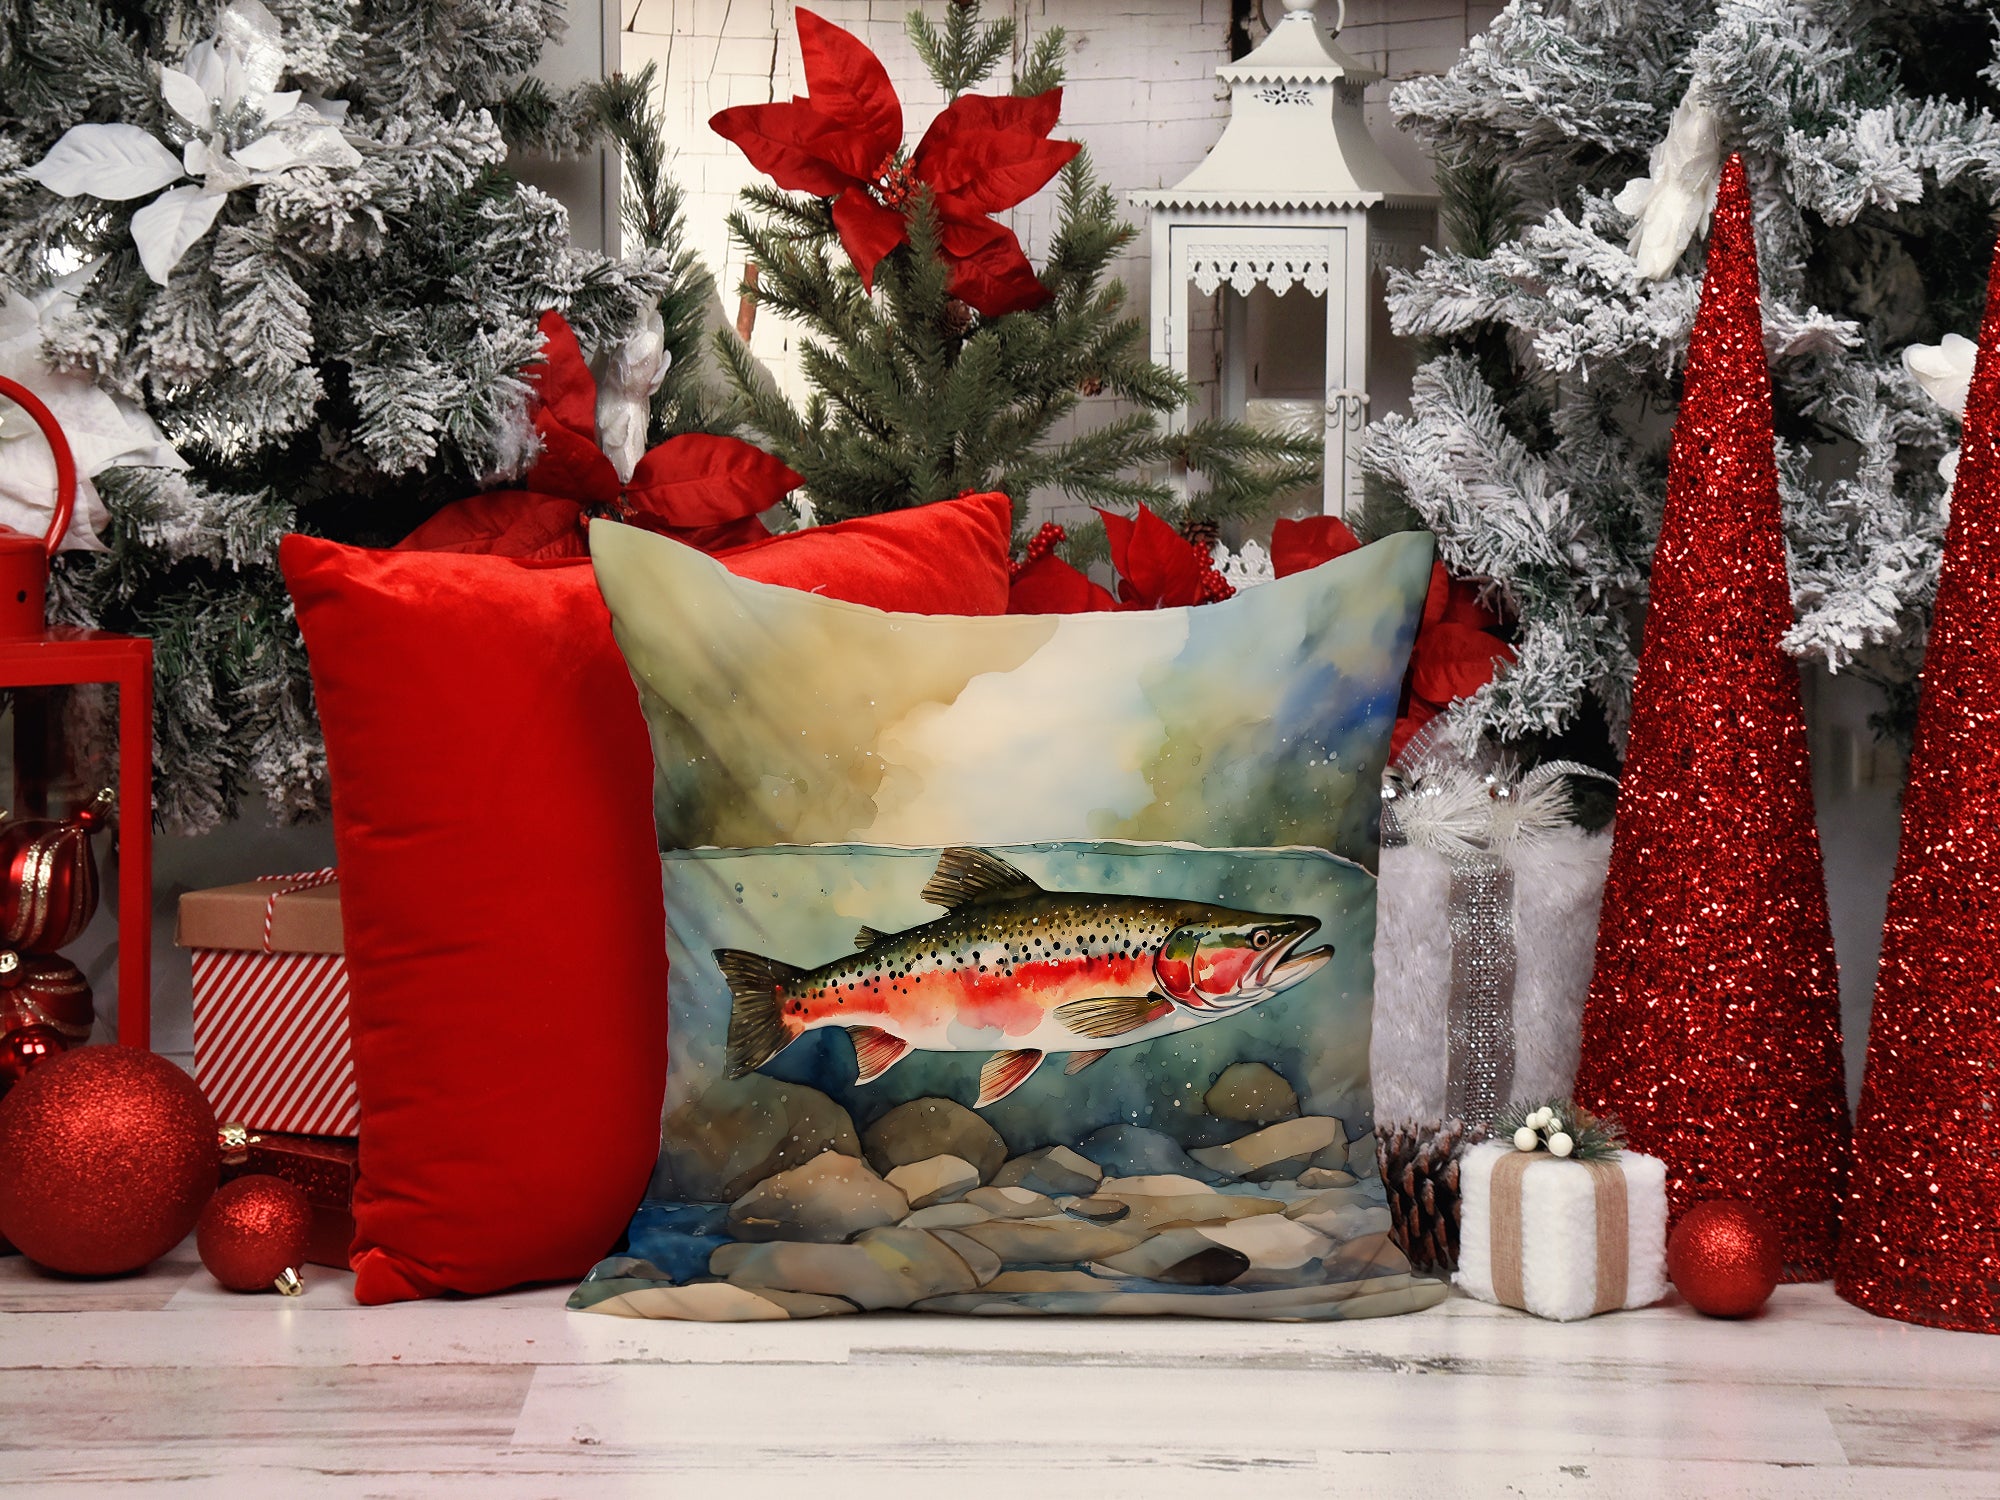 Trout Throw Pillow